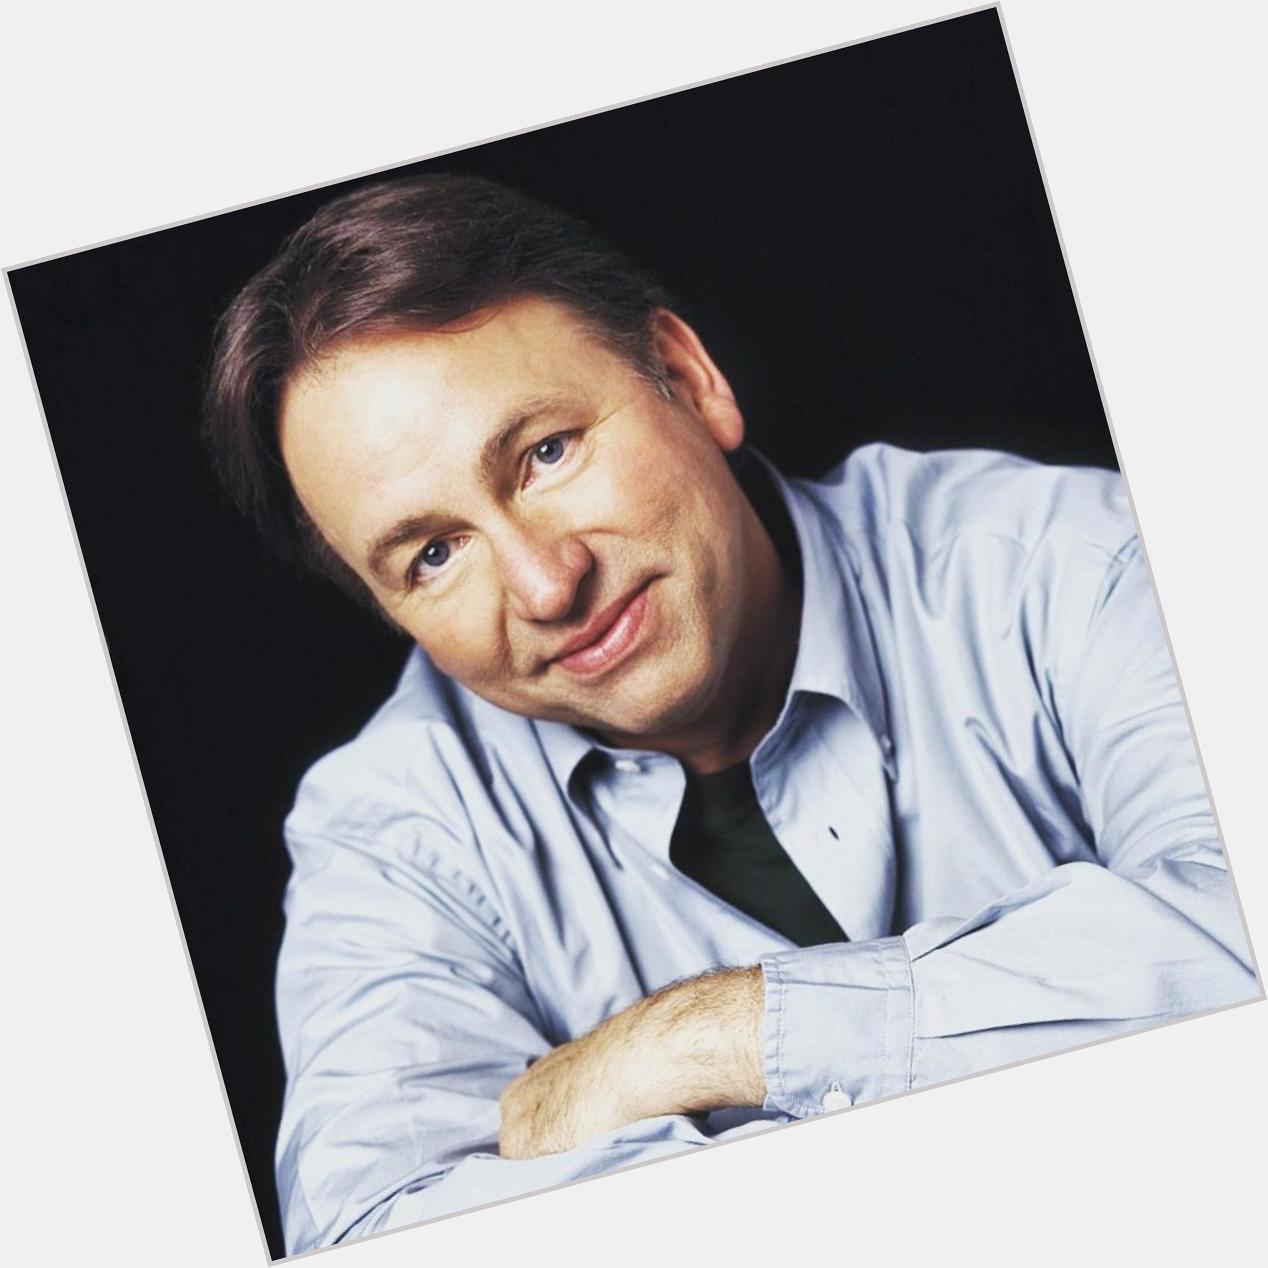 Happy birthday to the late John Ritter. He will always be remembered. What\s your favorite John Ritter movie/show? 